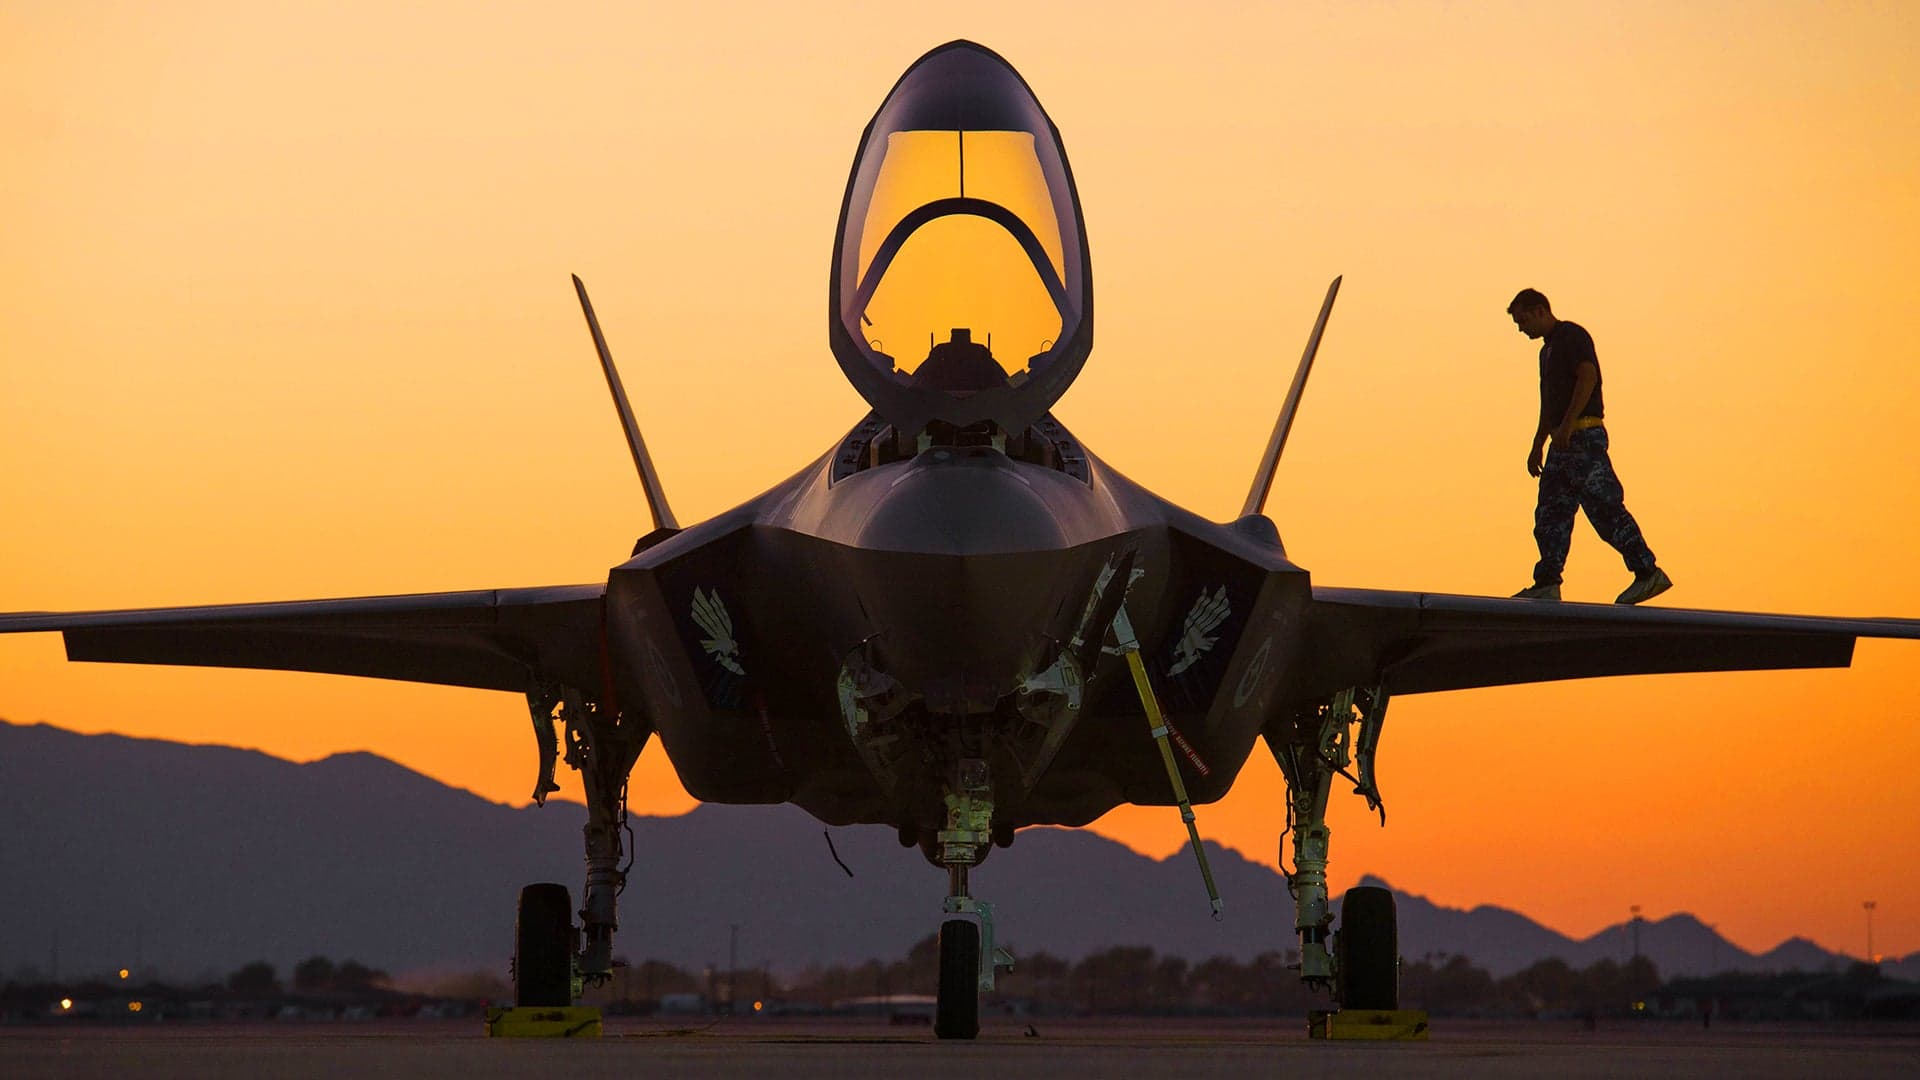 Here’s How The U.S. Could Allay Israeli Concerns Over Selling F-35s To UAE